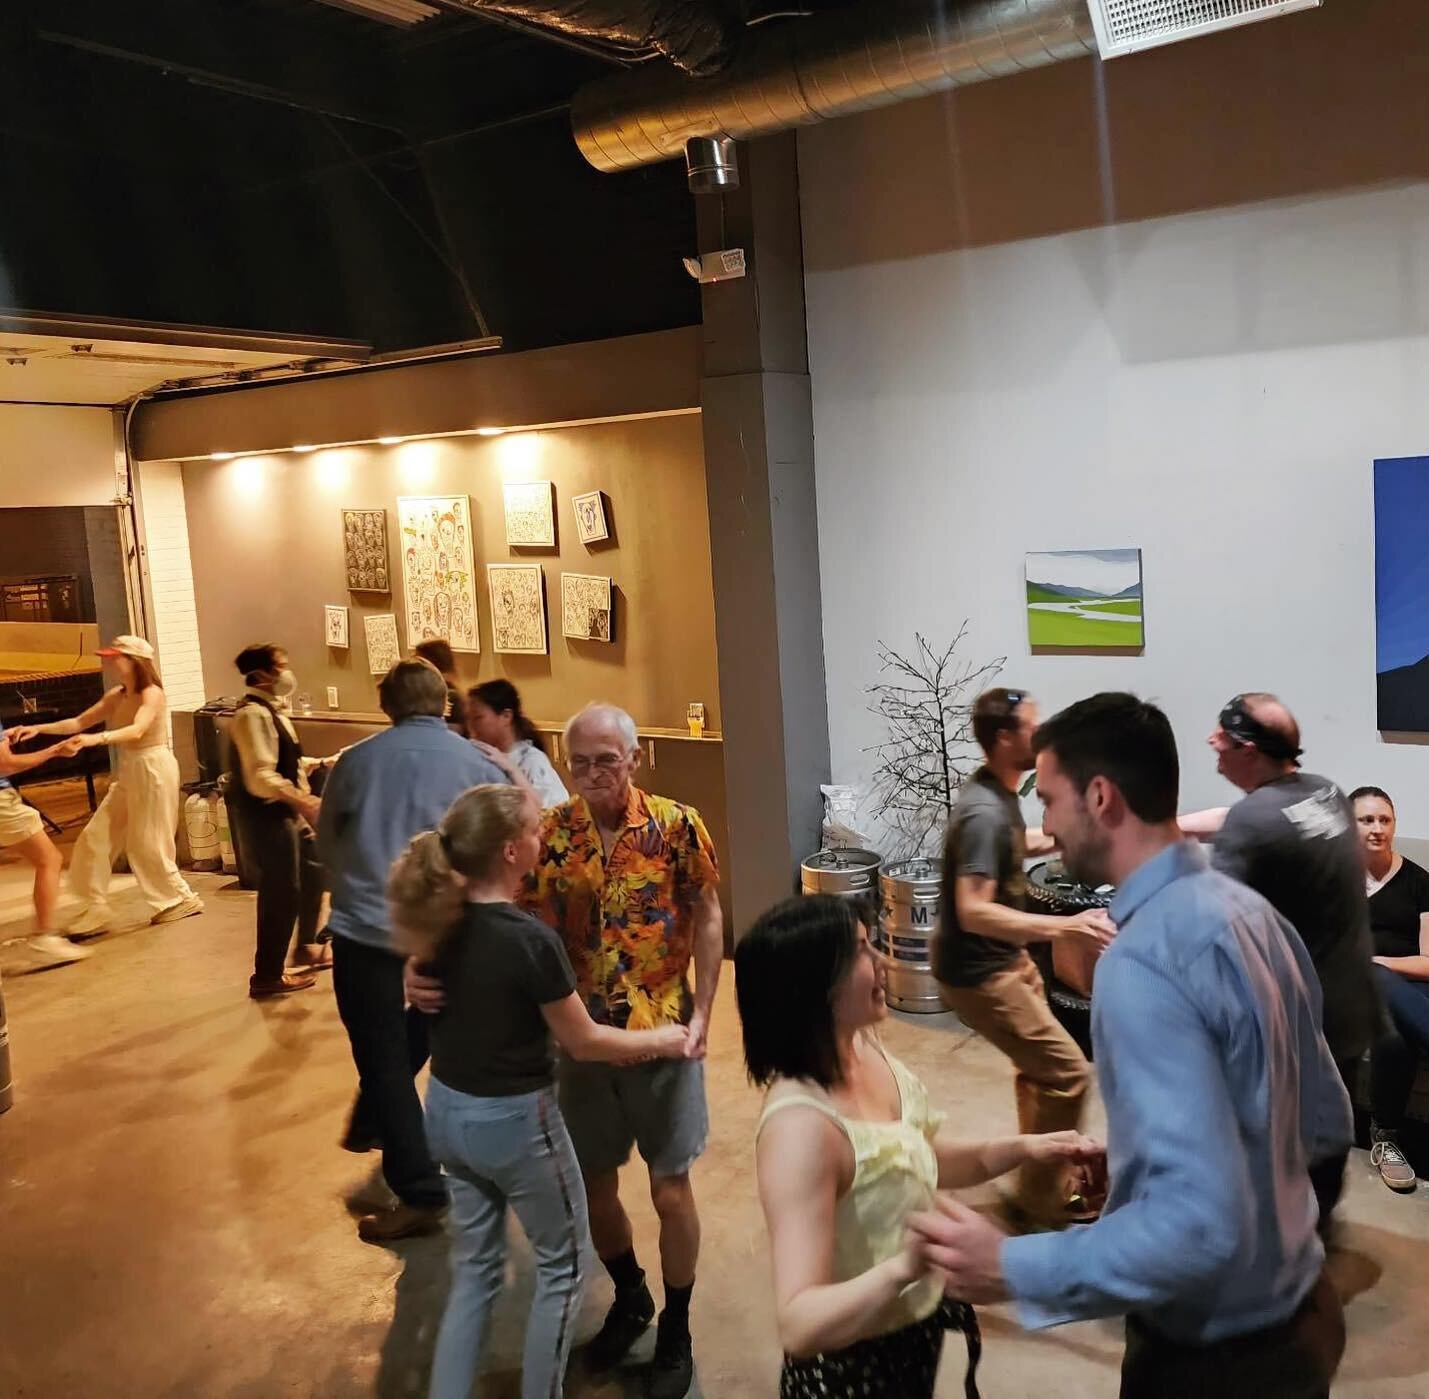 Don&rsquo;t forget - our May dance at Nimble Brewing is THIS THURSDAY at 7pm and we can&rsquo;t WAIT to dance with you! The event is free, with a beginner lesson to start and social dancing at 7:30 - no experience or partner required. But we always e